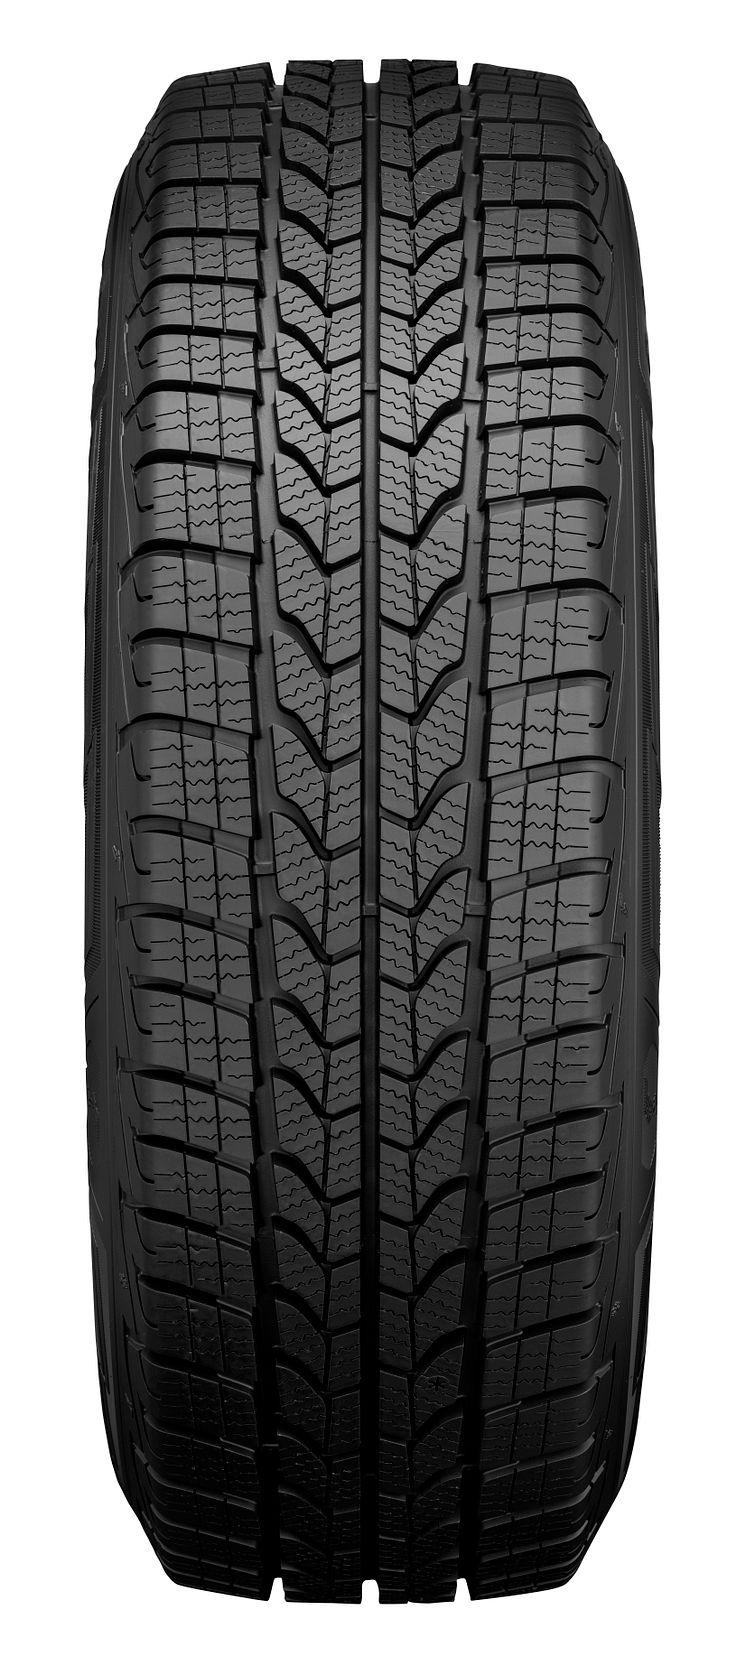 Ultra Grip Cargo_LY4814-00_205-65R16C_view 3 Front_Original_92605